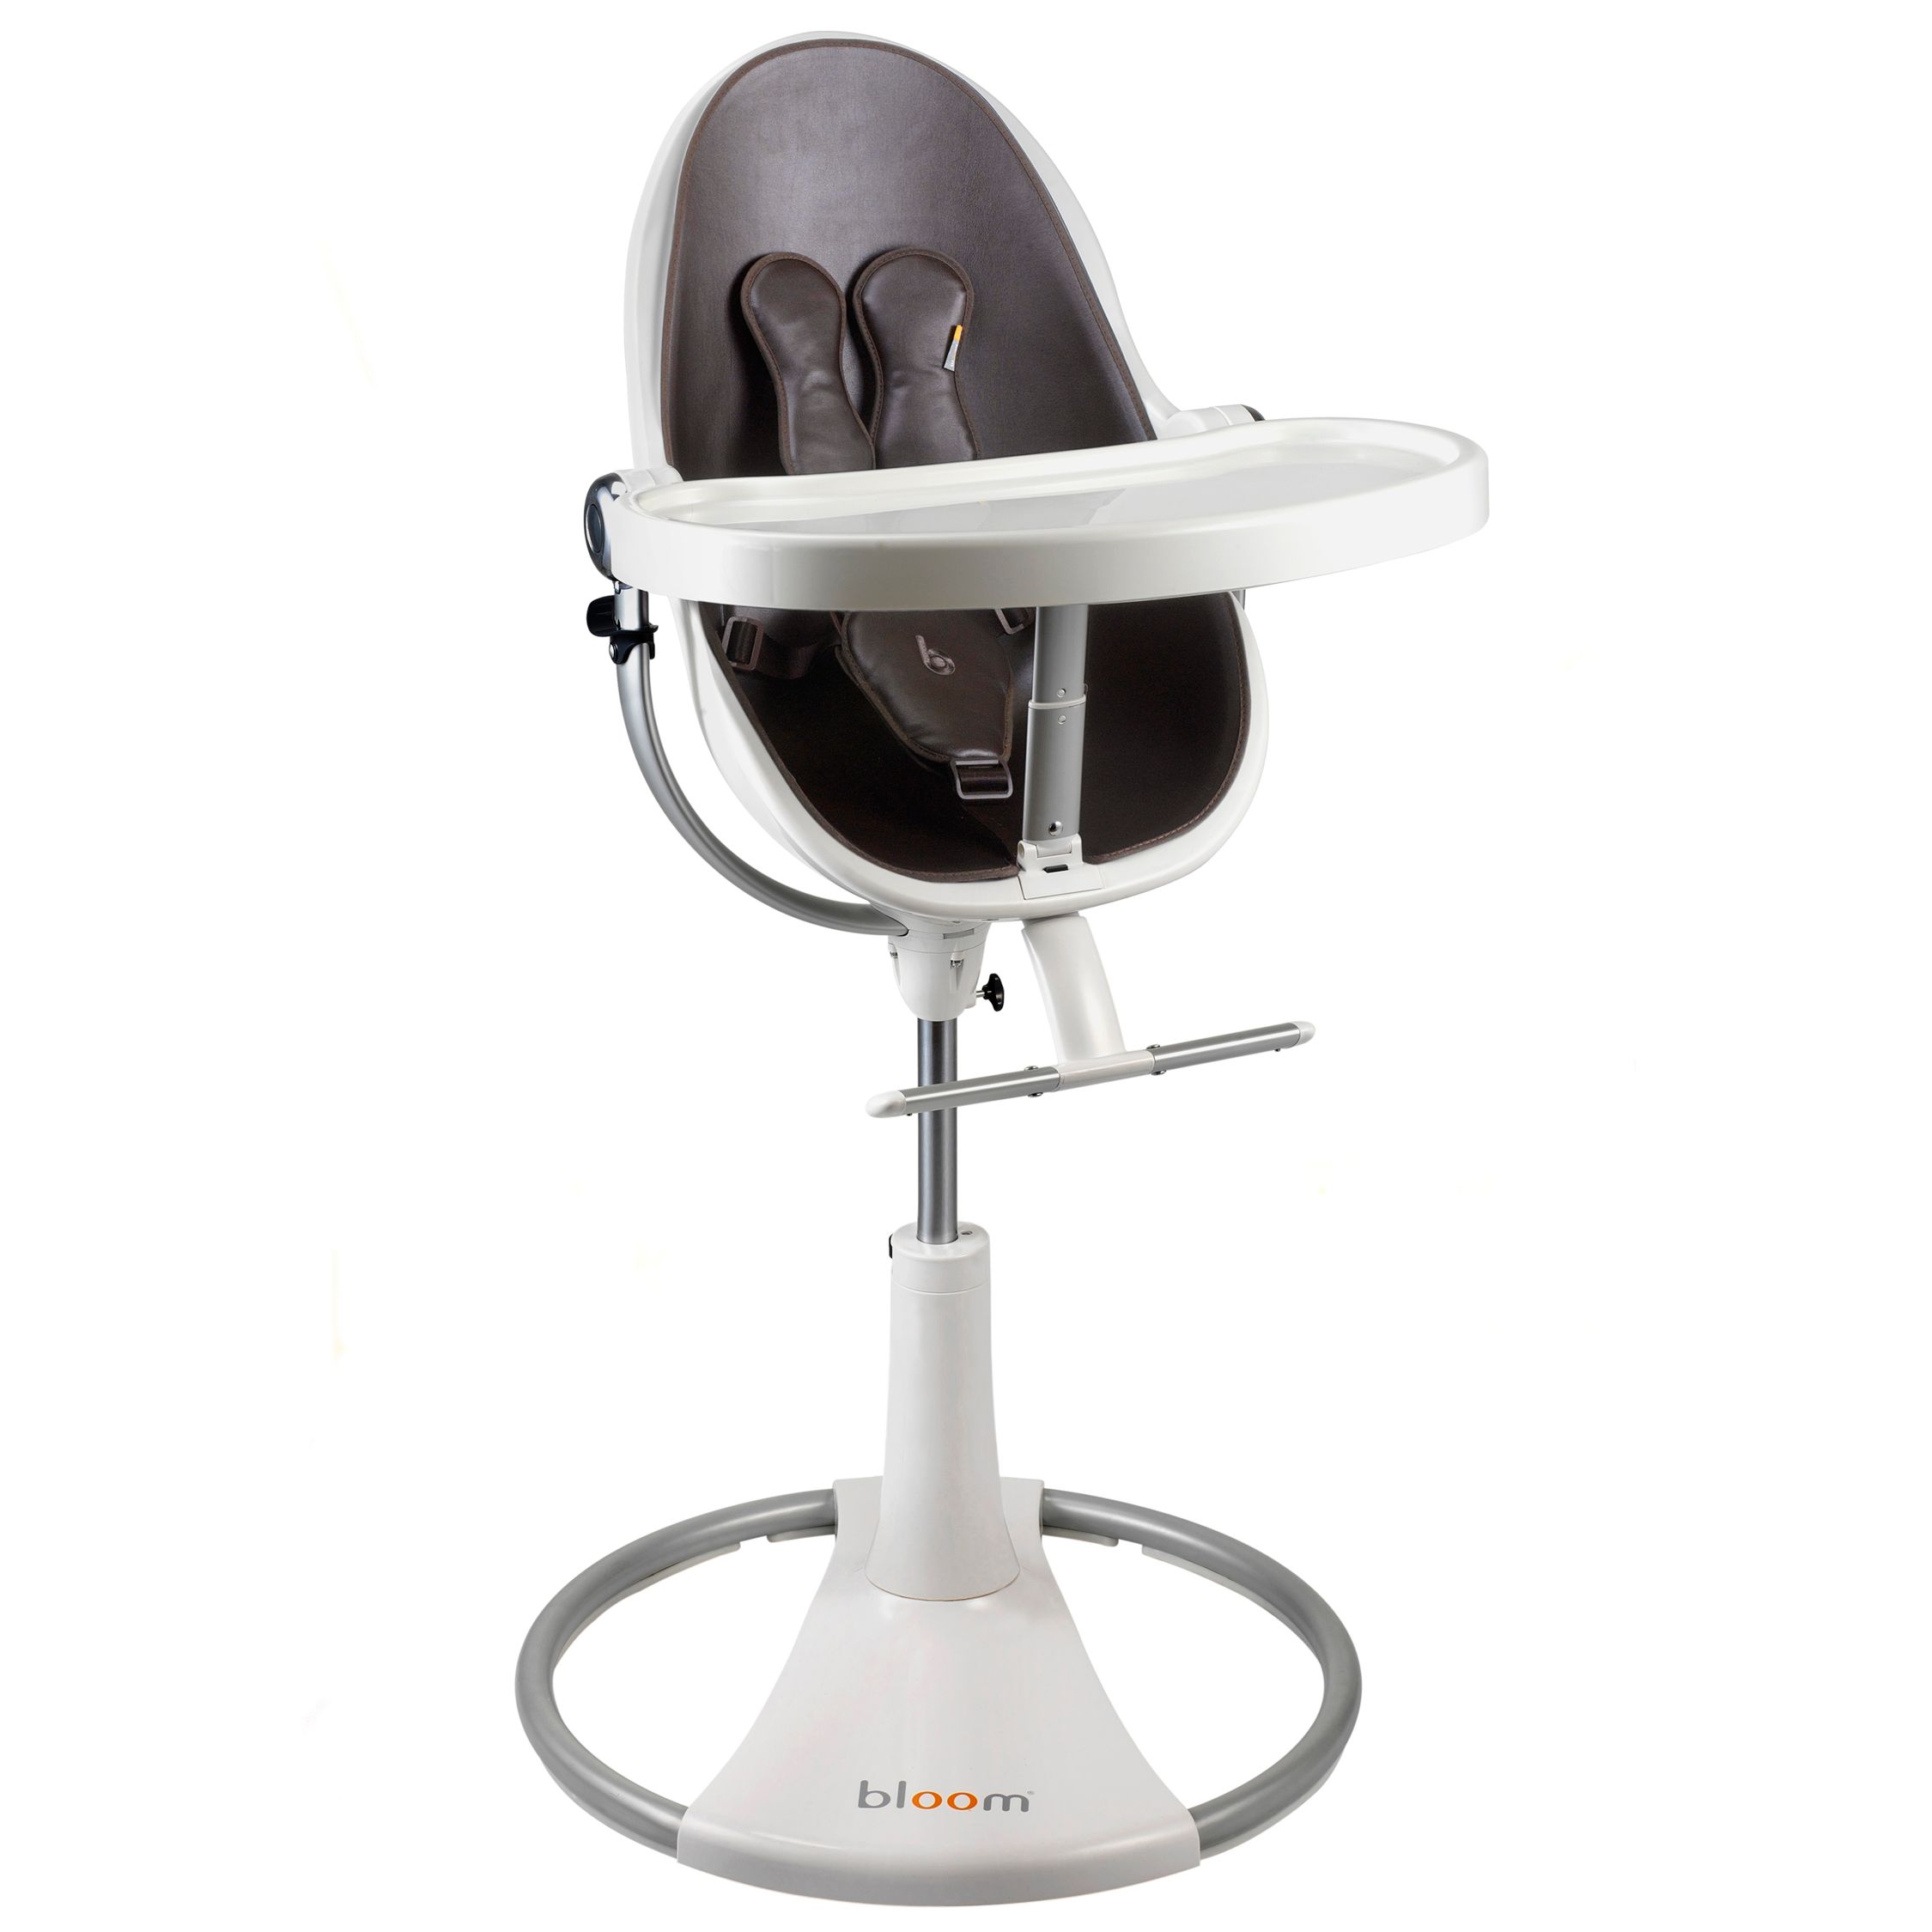 bloom Fresco Loft Contemporary Leatherette Baby Chair, Ivory White with Henna Brown at John Lewis